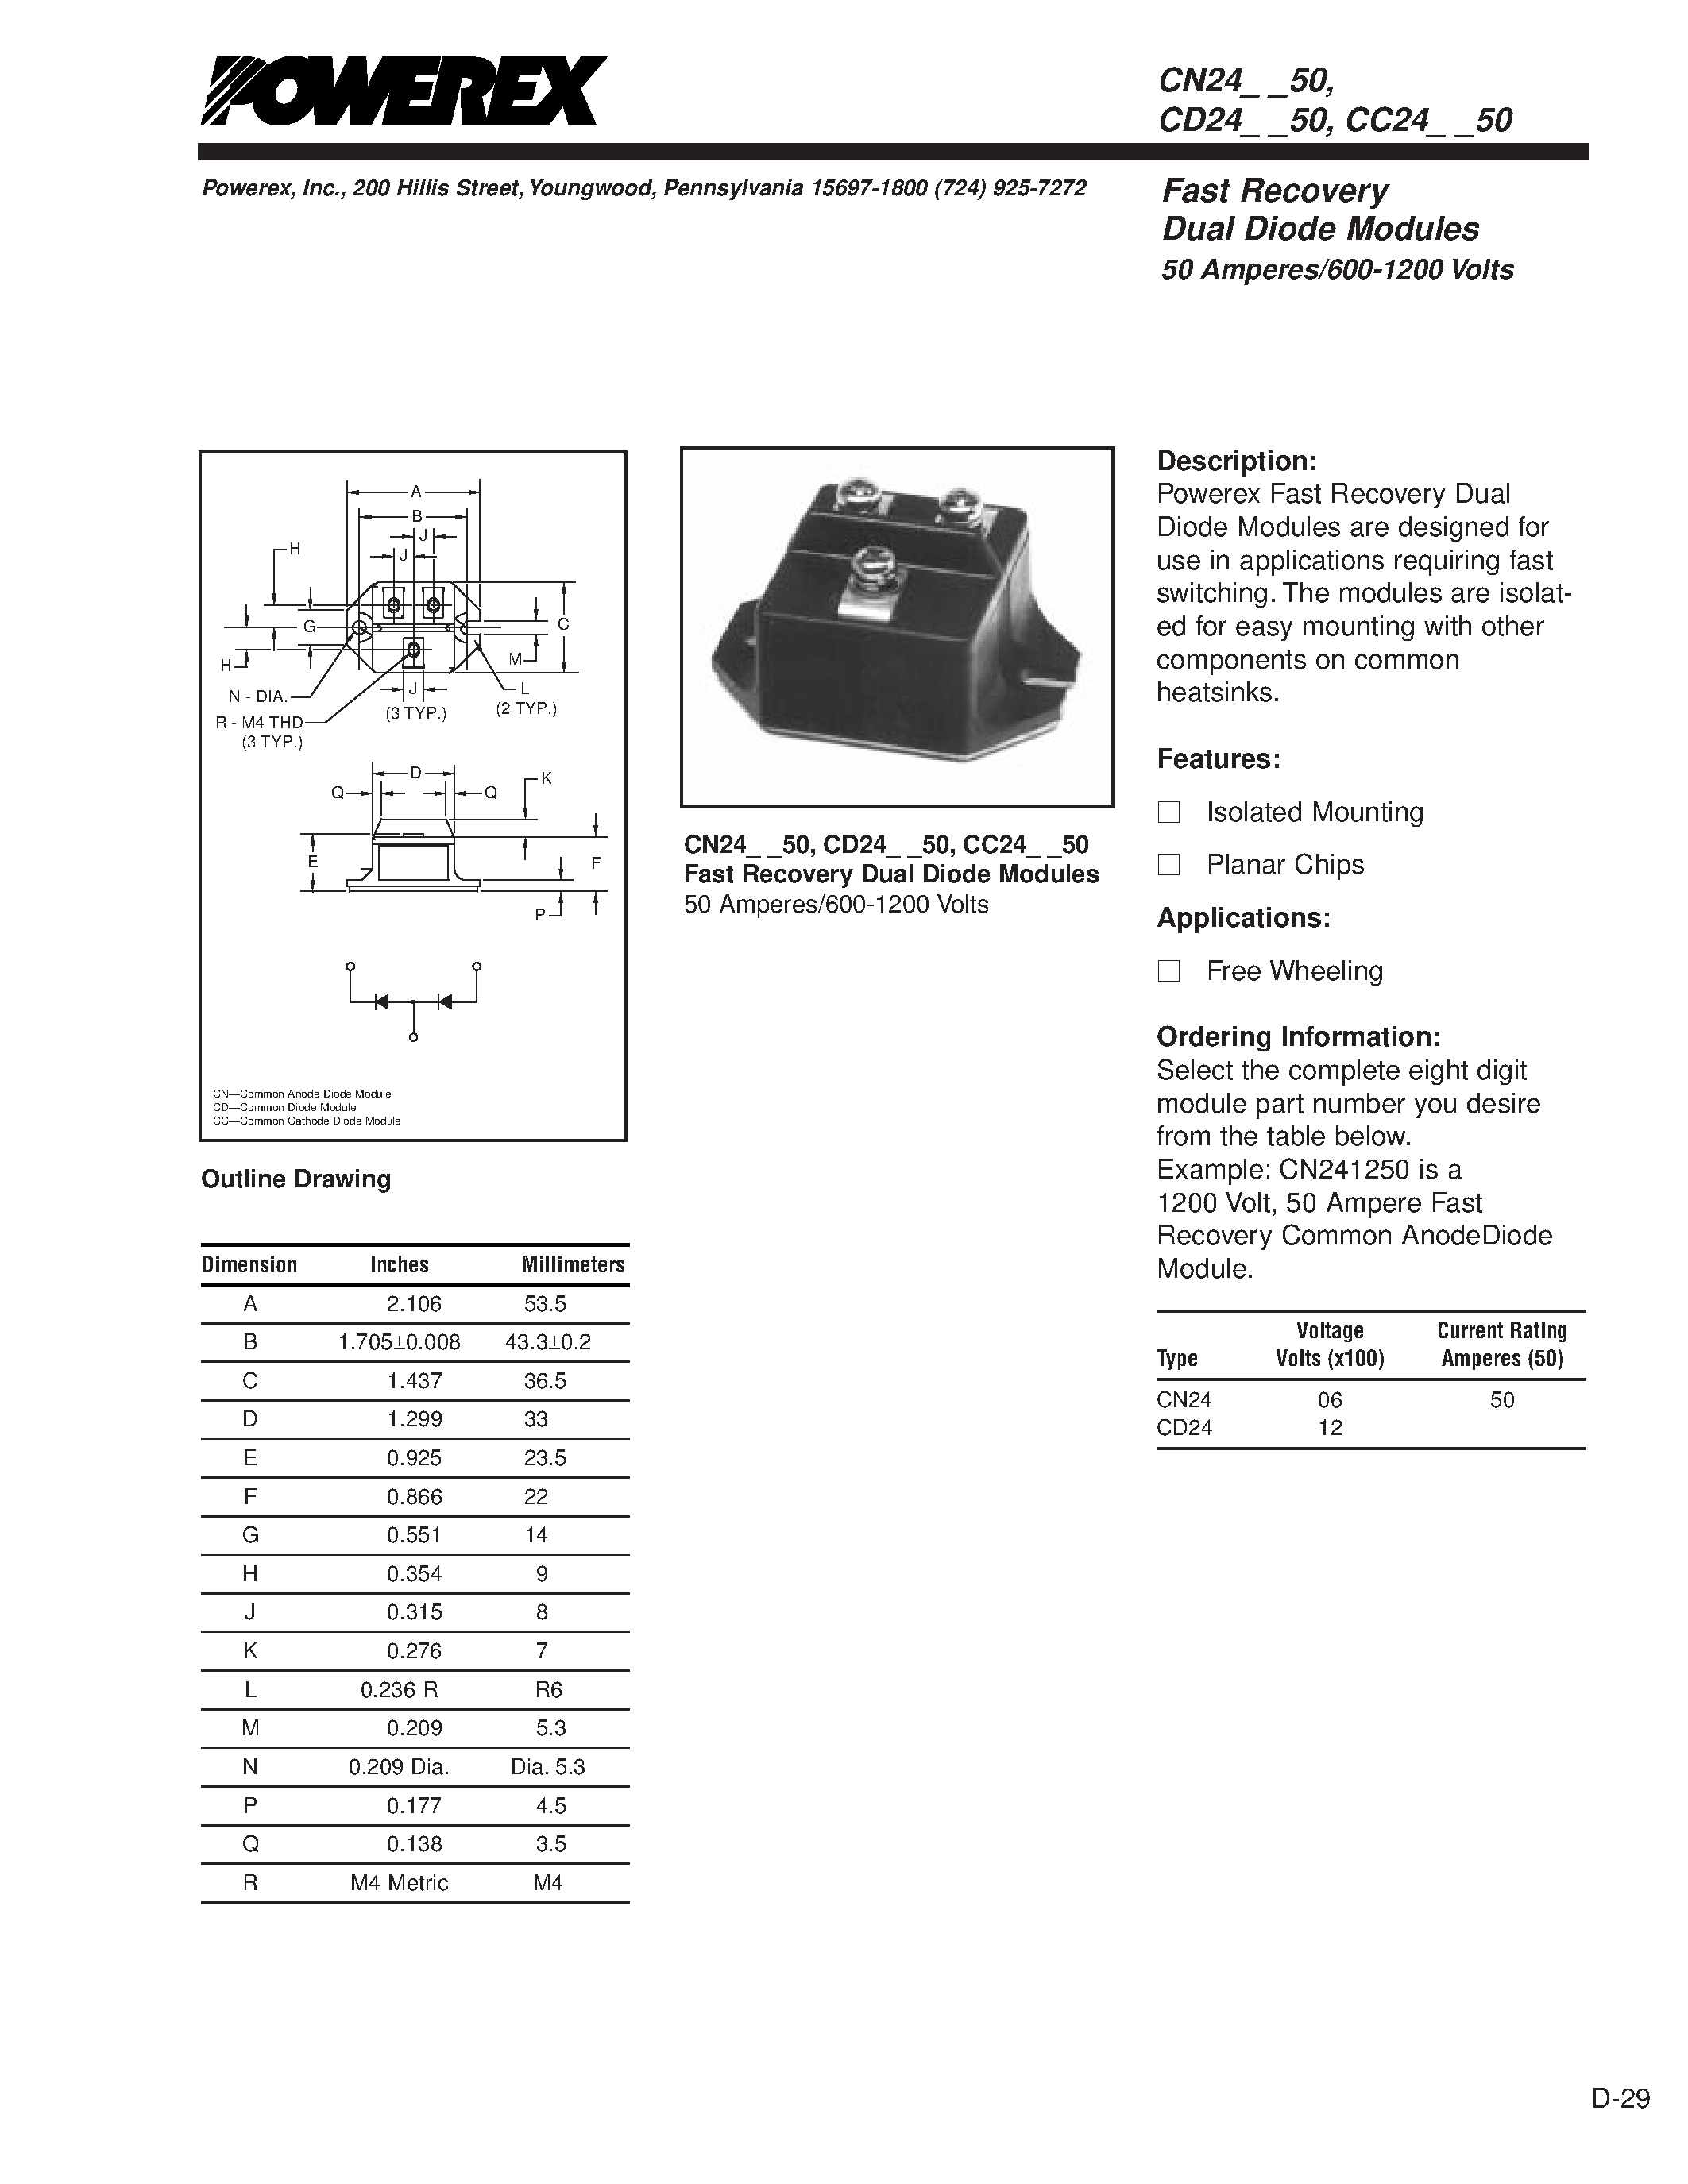 Datasheet CD241250 - Fast Recovery Dual Diode Modules 50 Amperes/600-1200 Volts page 1